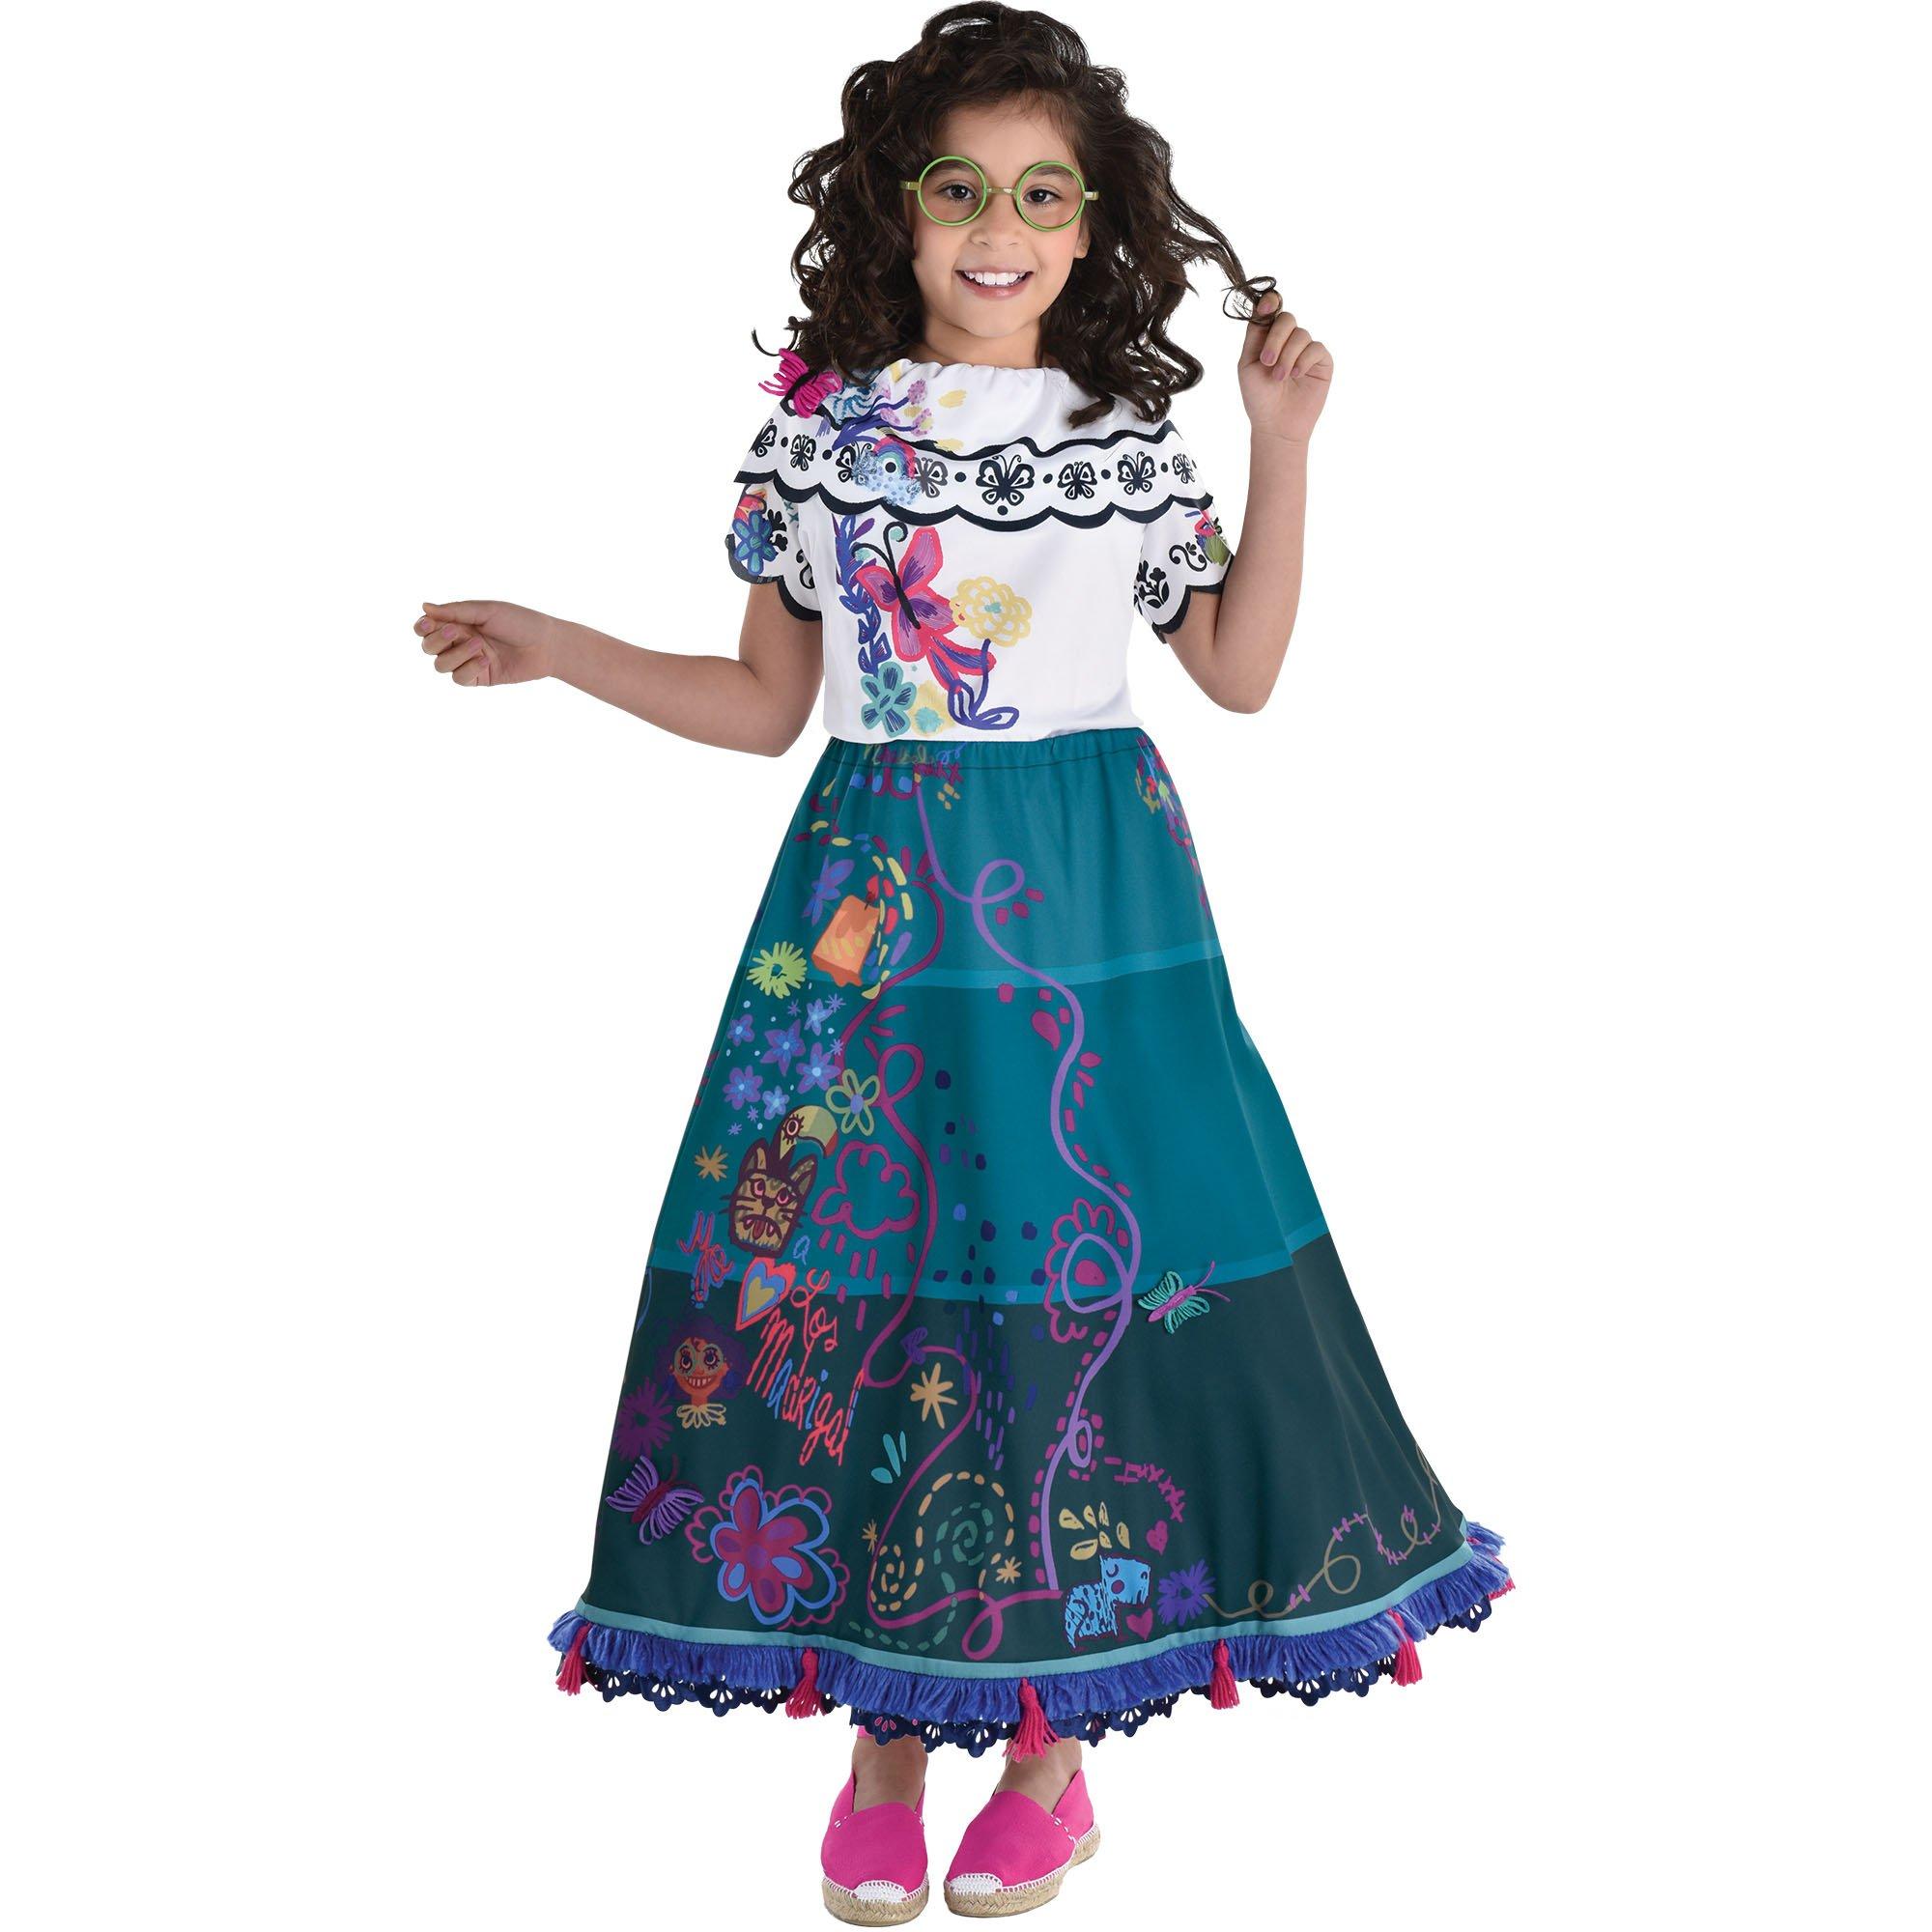 Encanto Inspired Mirabel Birthday Party Dress up With Bag and 